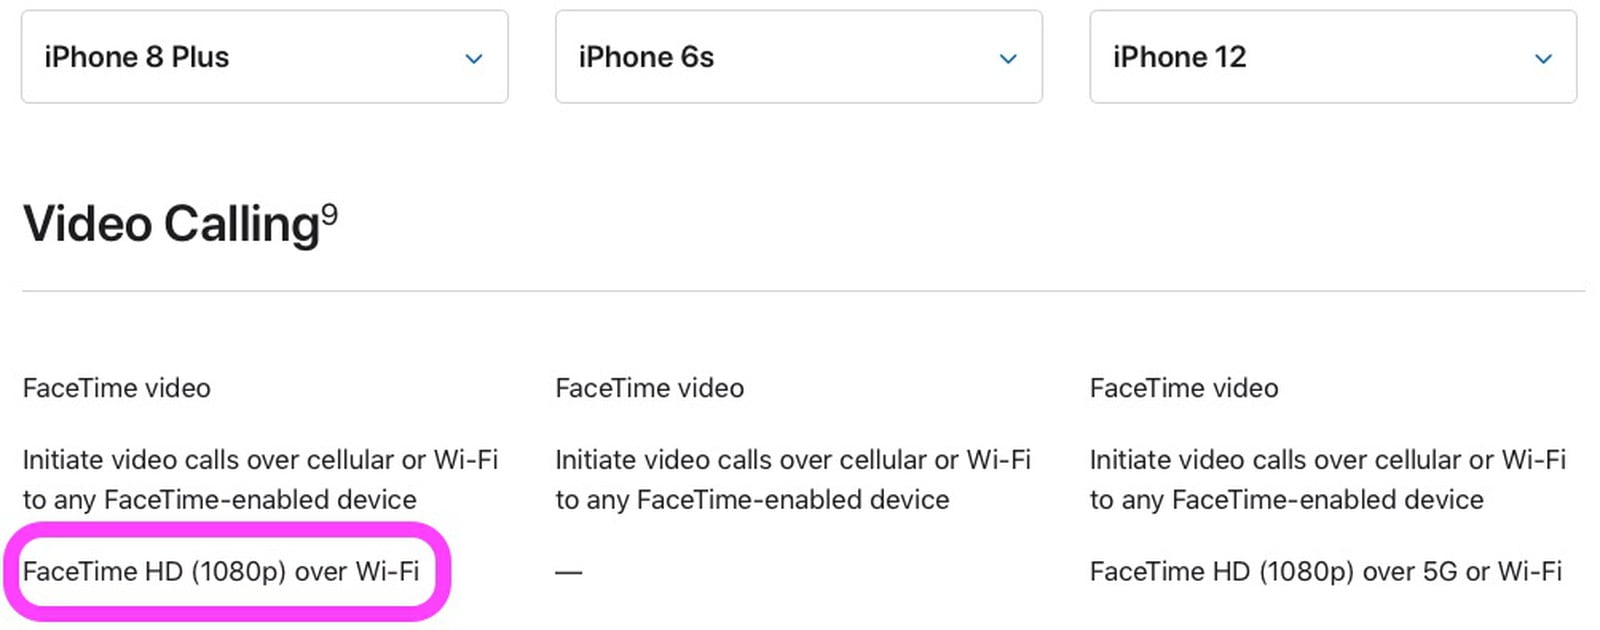 iOS 14.2 introduces FaceTime in high resolution 1080p